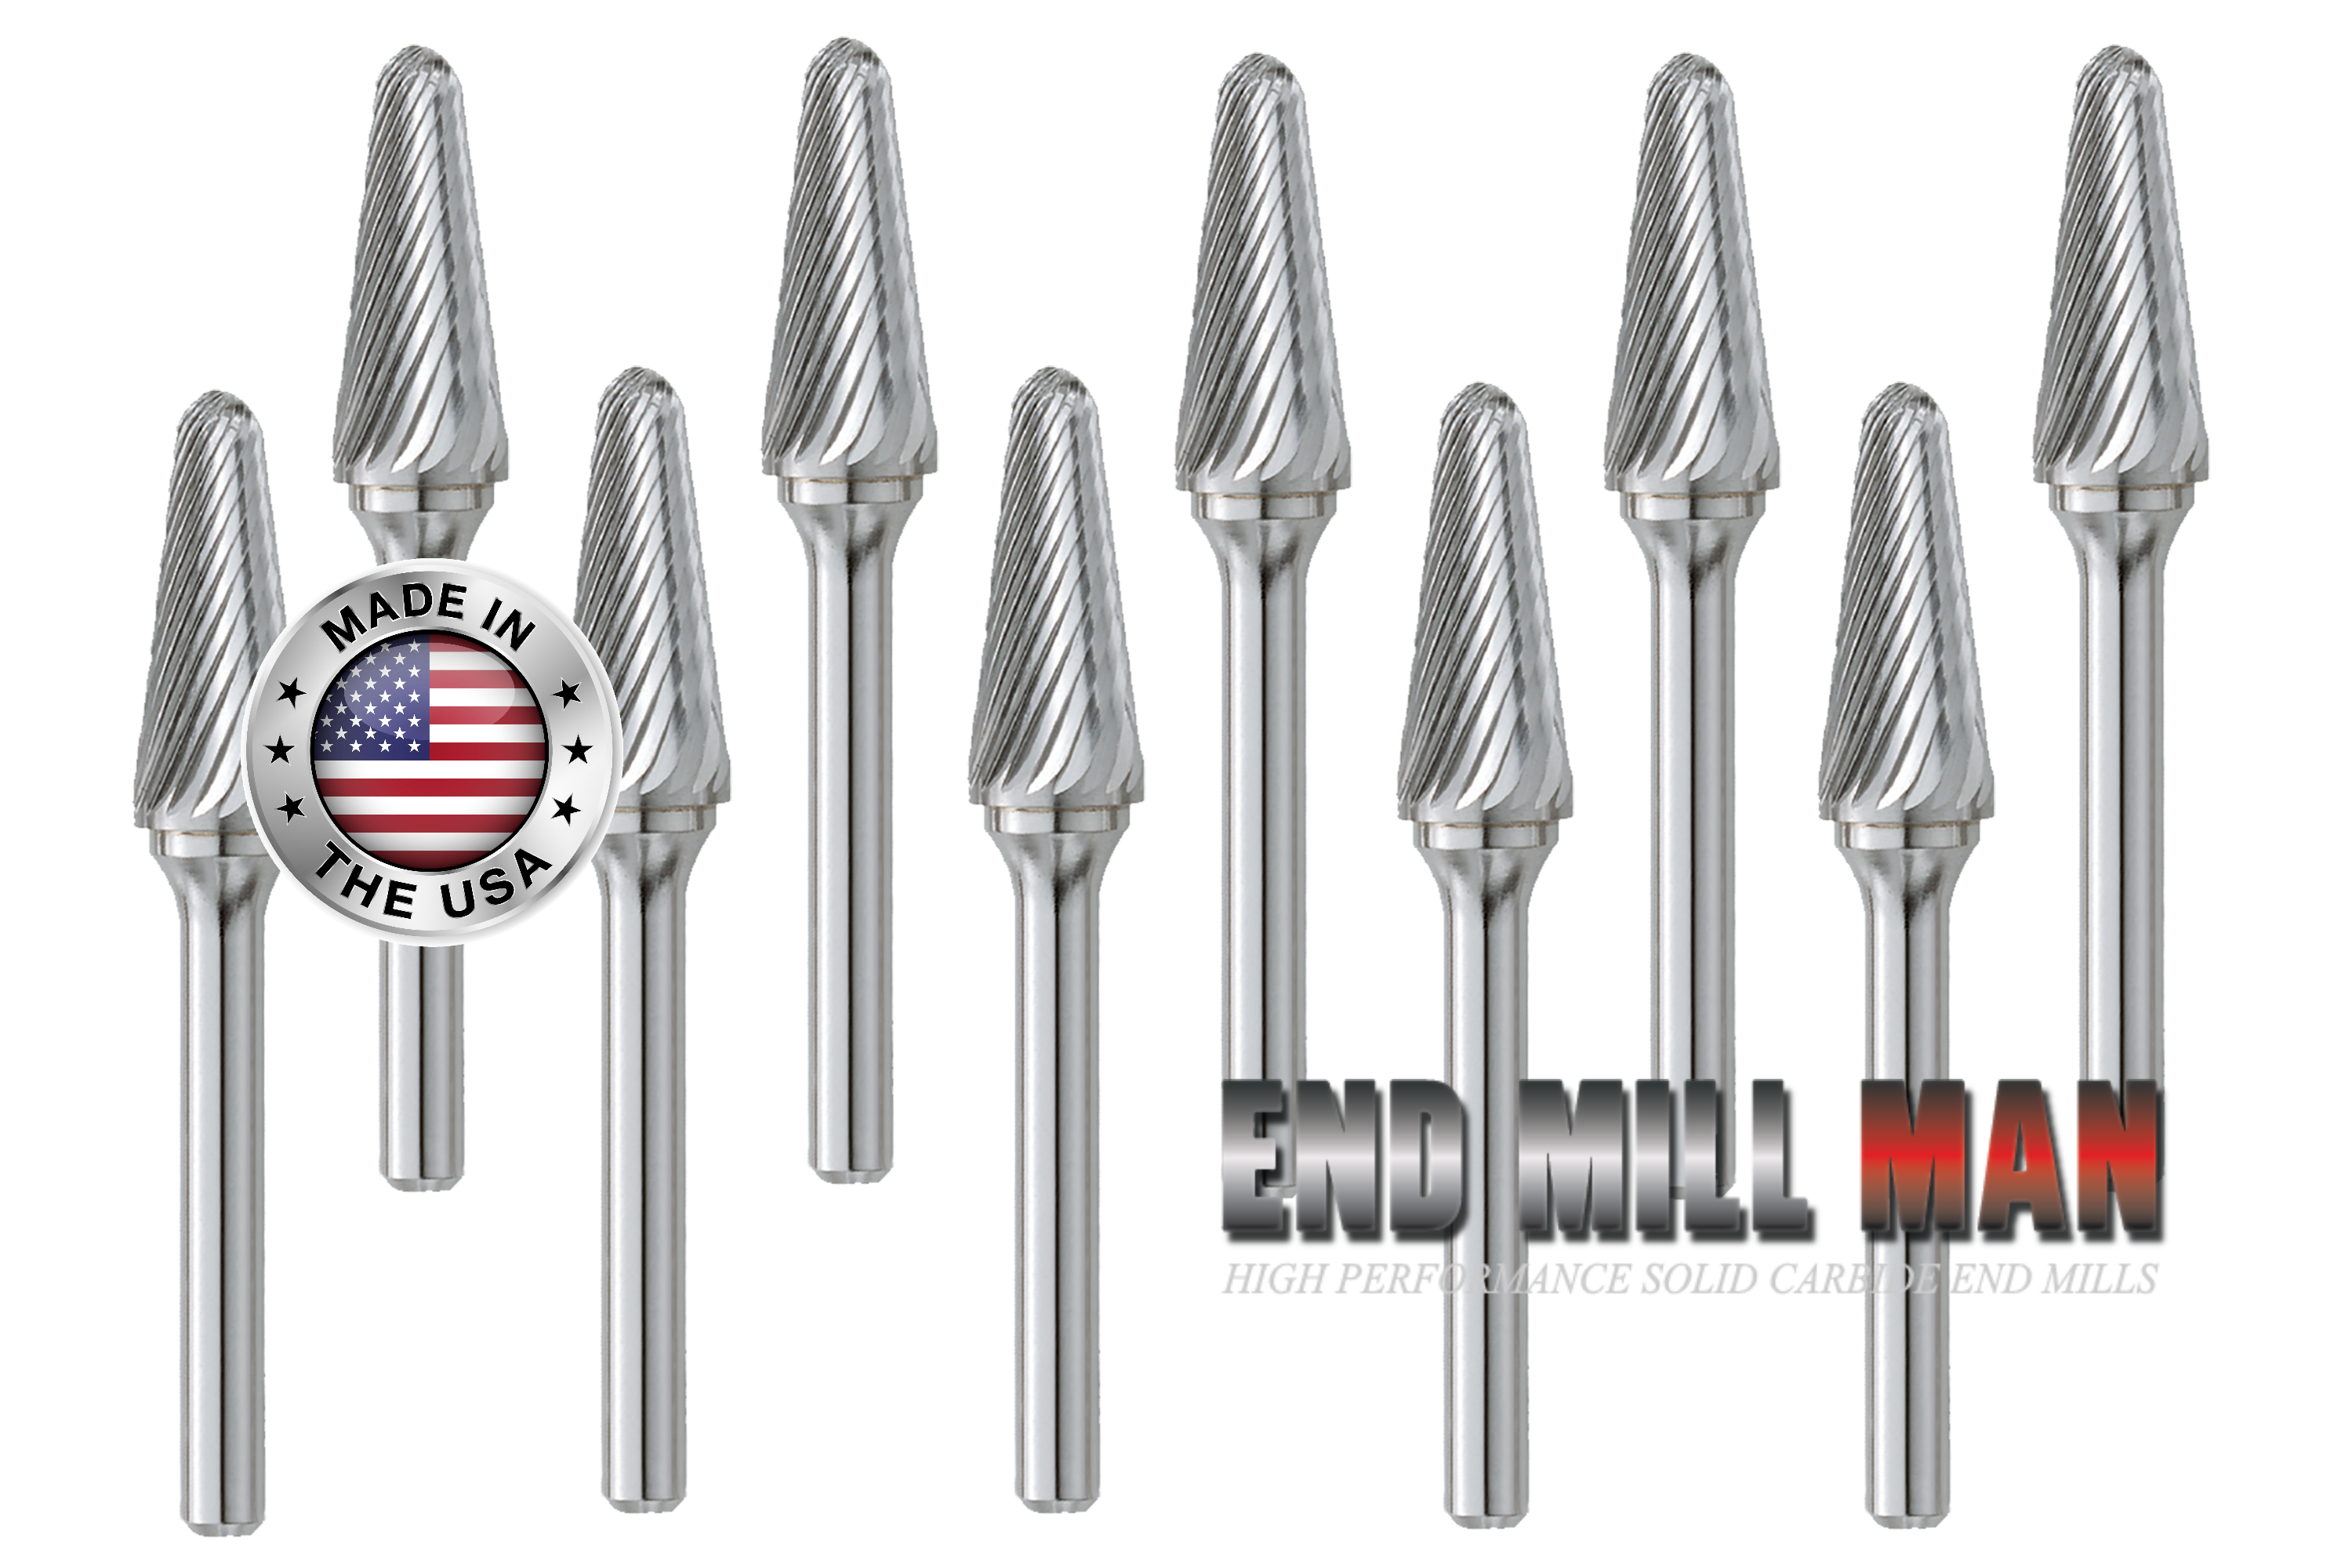 SL-4L6 14° Burr (10 Pack) 1/2" x 1-1/8" Cut Length x 6-1/2" OAL on 1/4" Shanks - The End Mill Store 